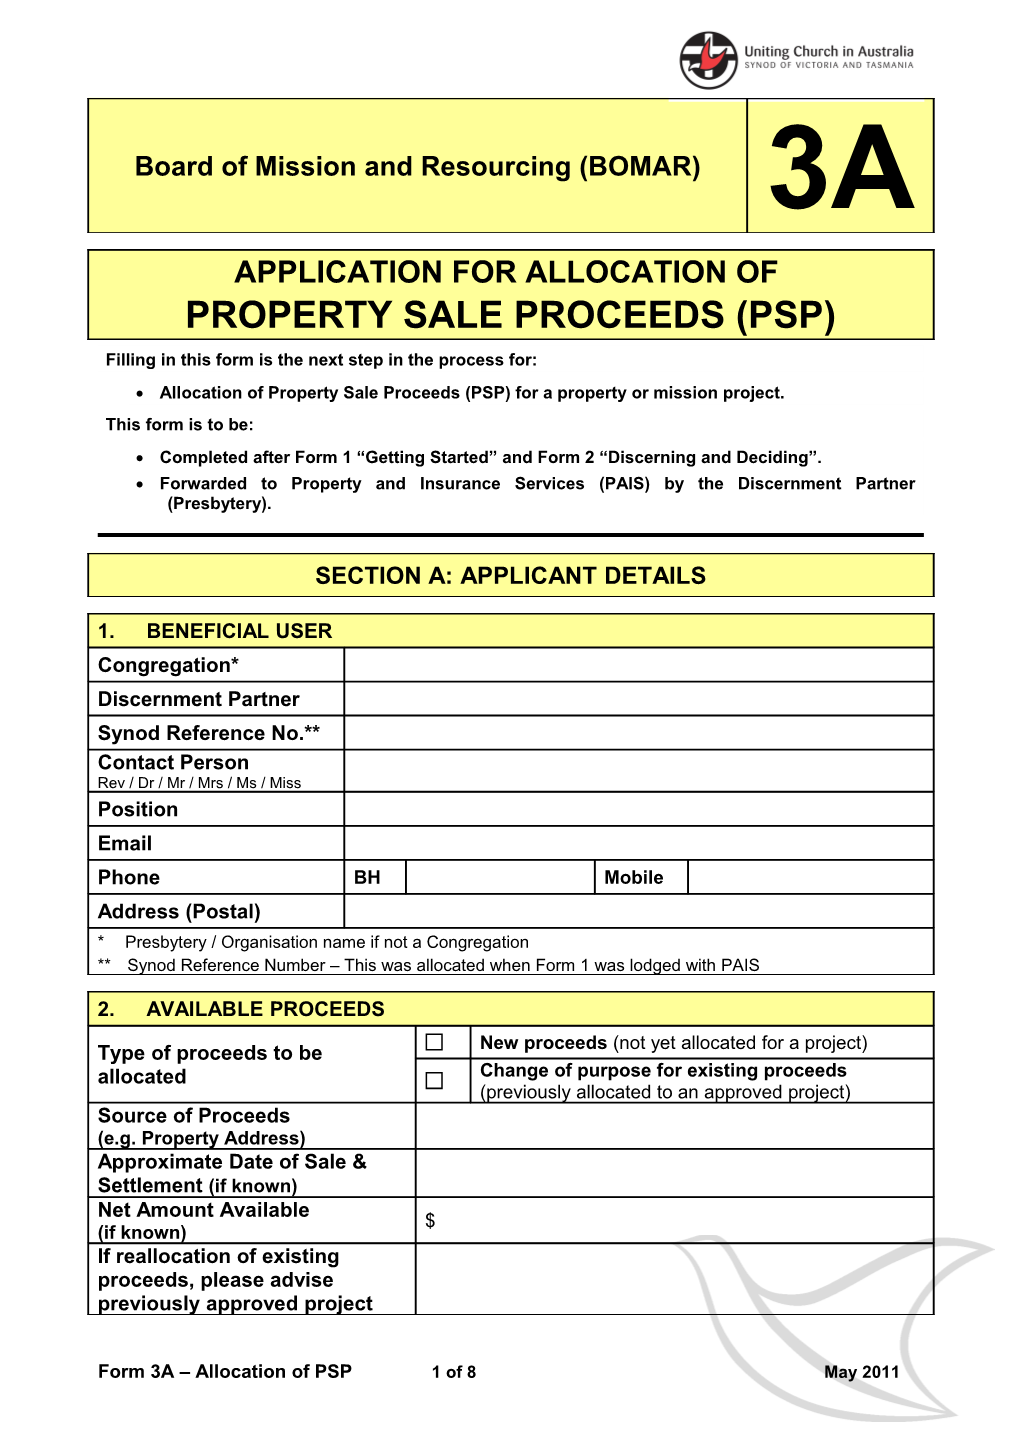 Form 3A Allocation of PSP